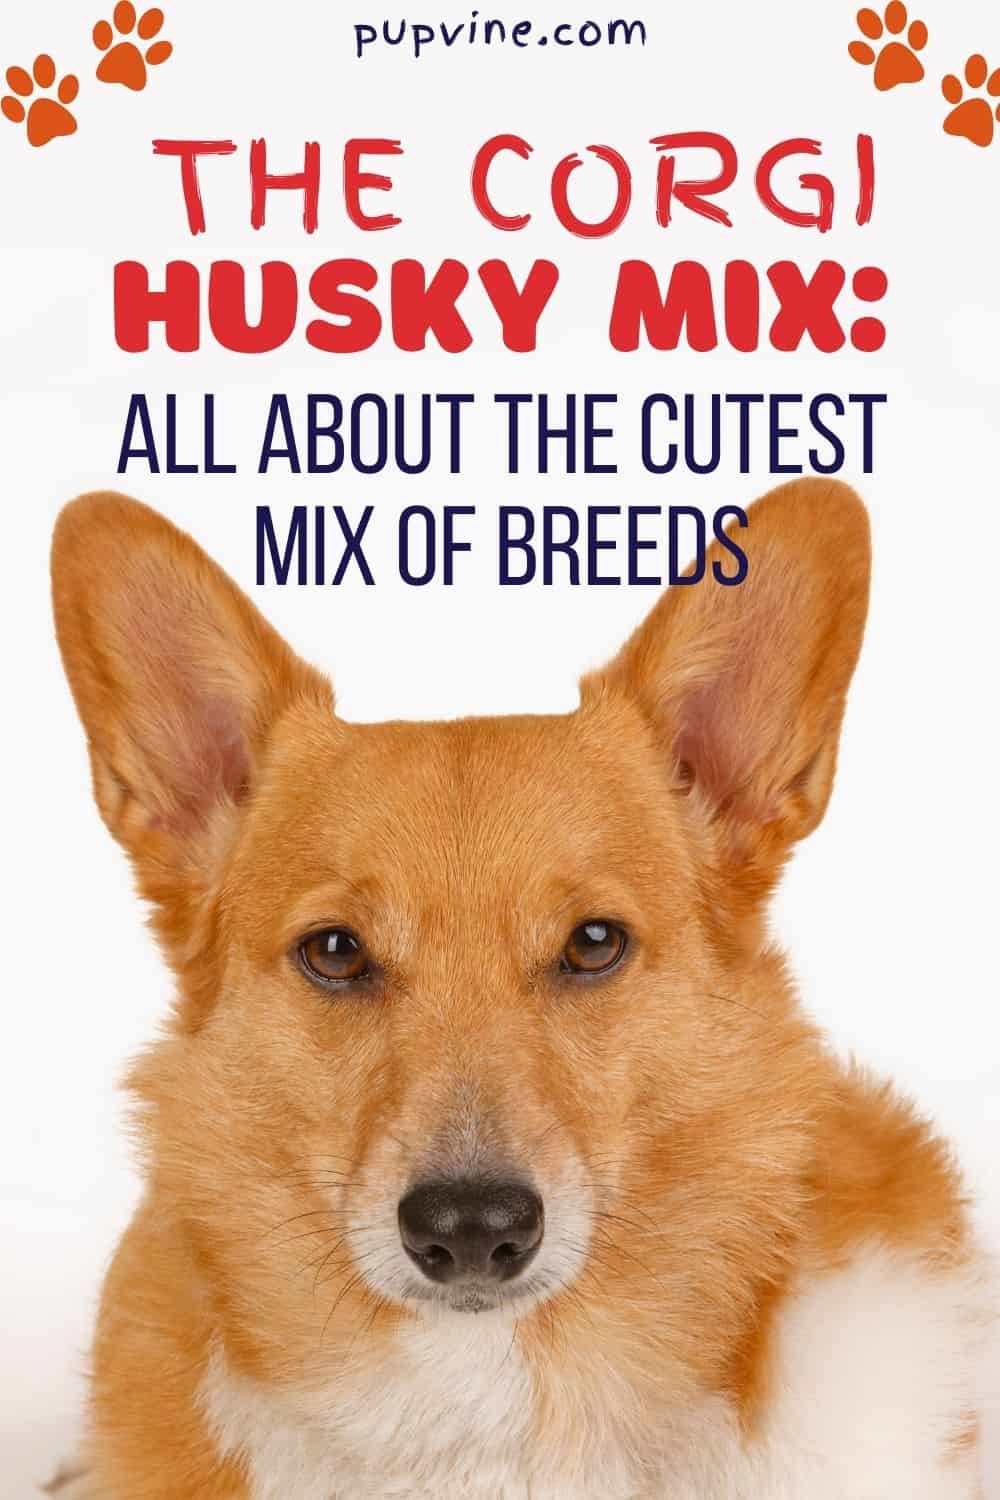 The Corgi Husky Mix – All About The Cutest Mix Of Breeds